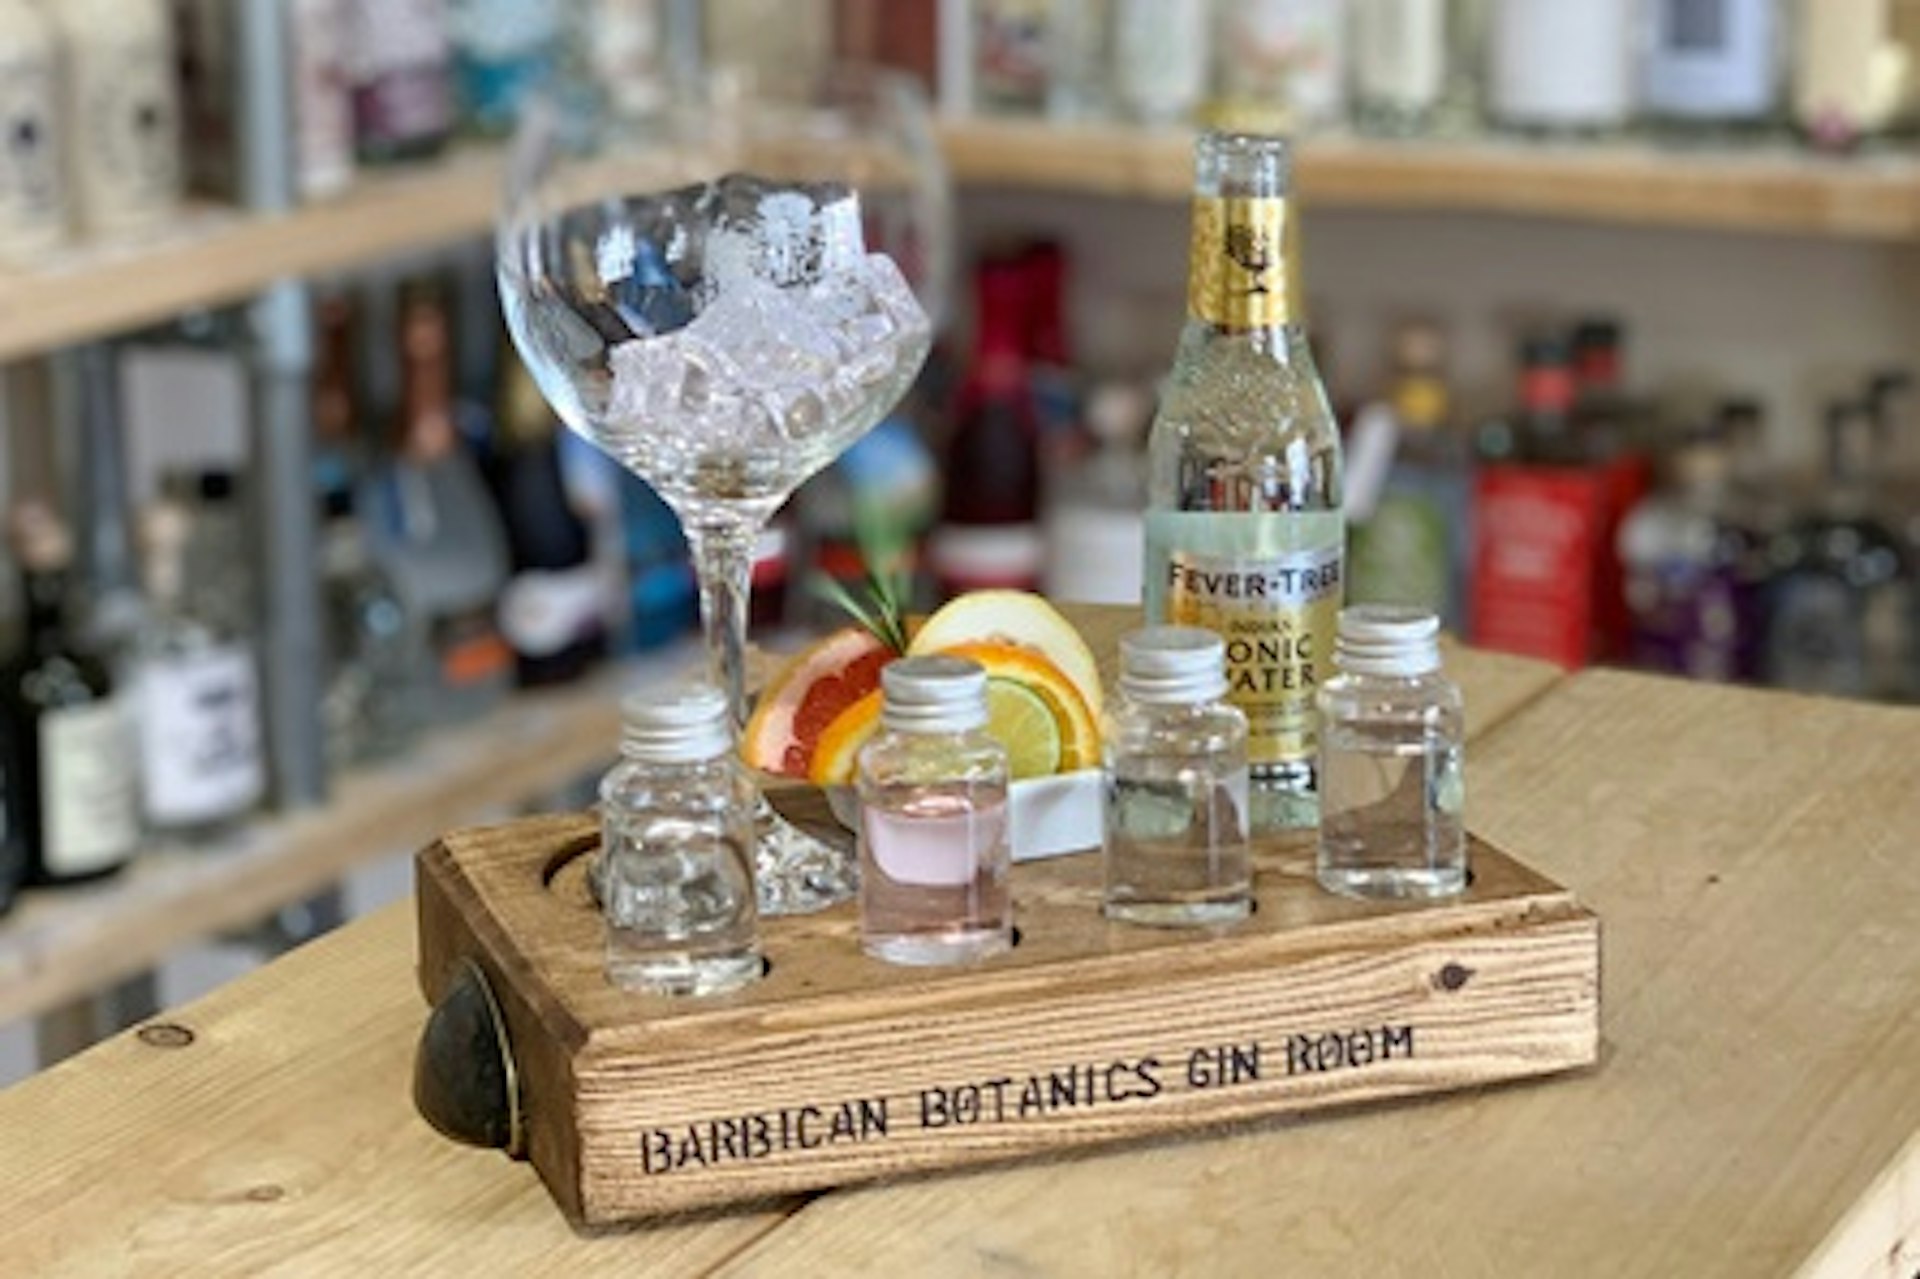 Gin Flight Self-Guided Tasting at Barbican Botanics Gin Room for Two 1